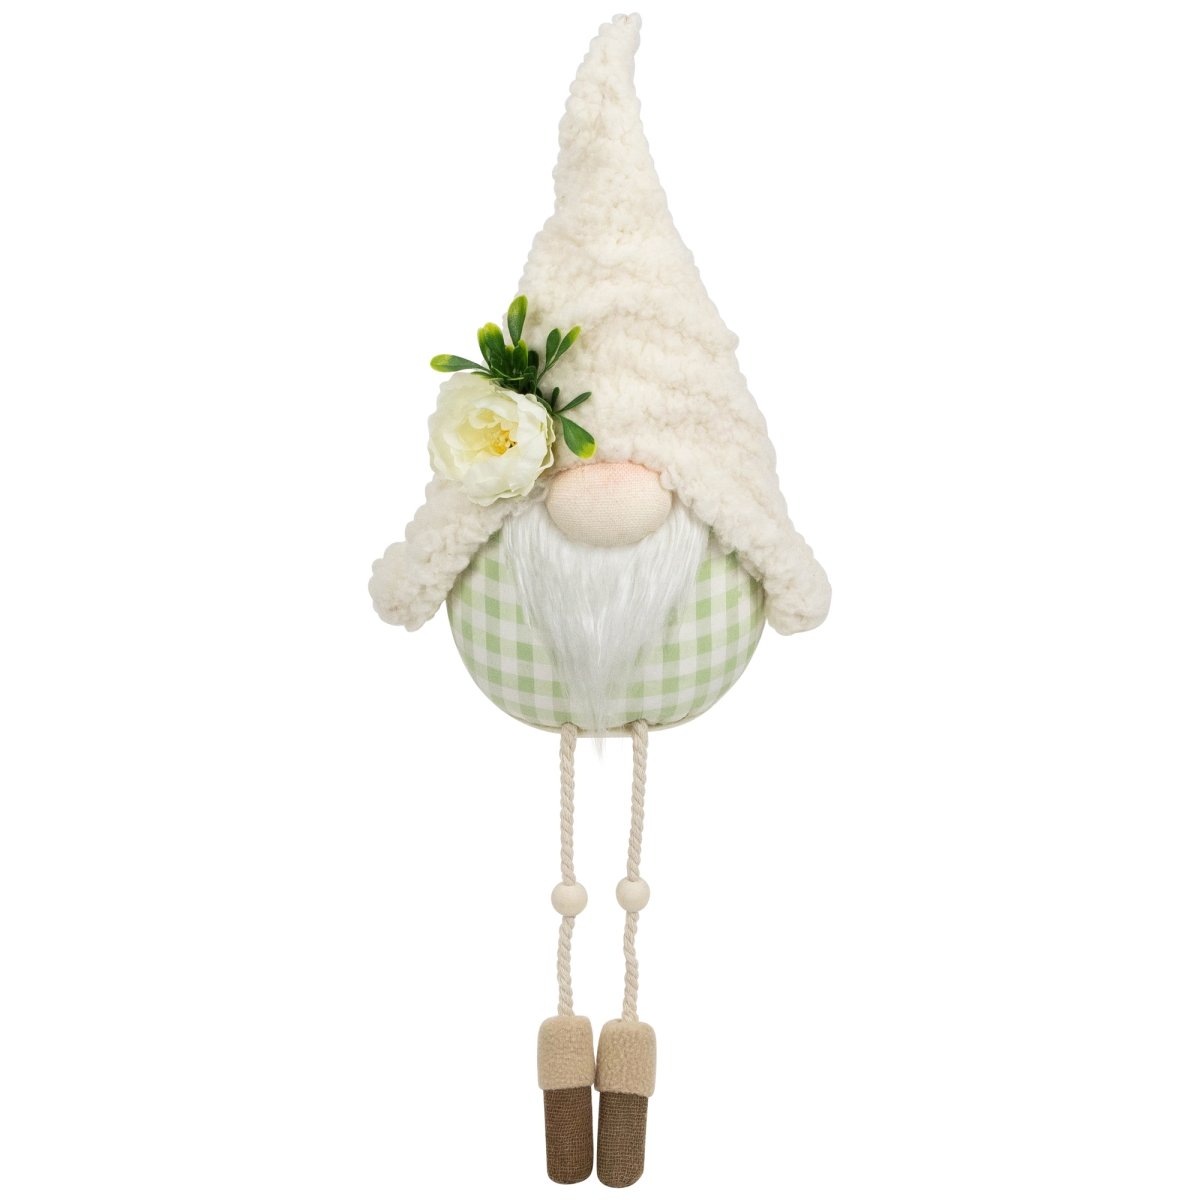 Picture of Northlight 35745094 10.5 x 7 x 3 in. Plush Sitting Gnome with Dangling Legs Spring Figurine